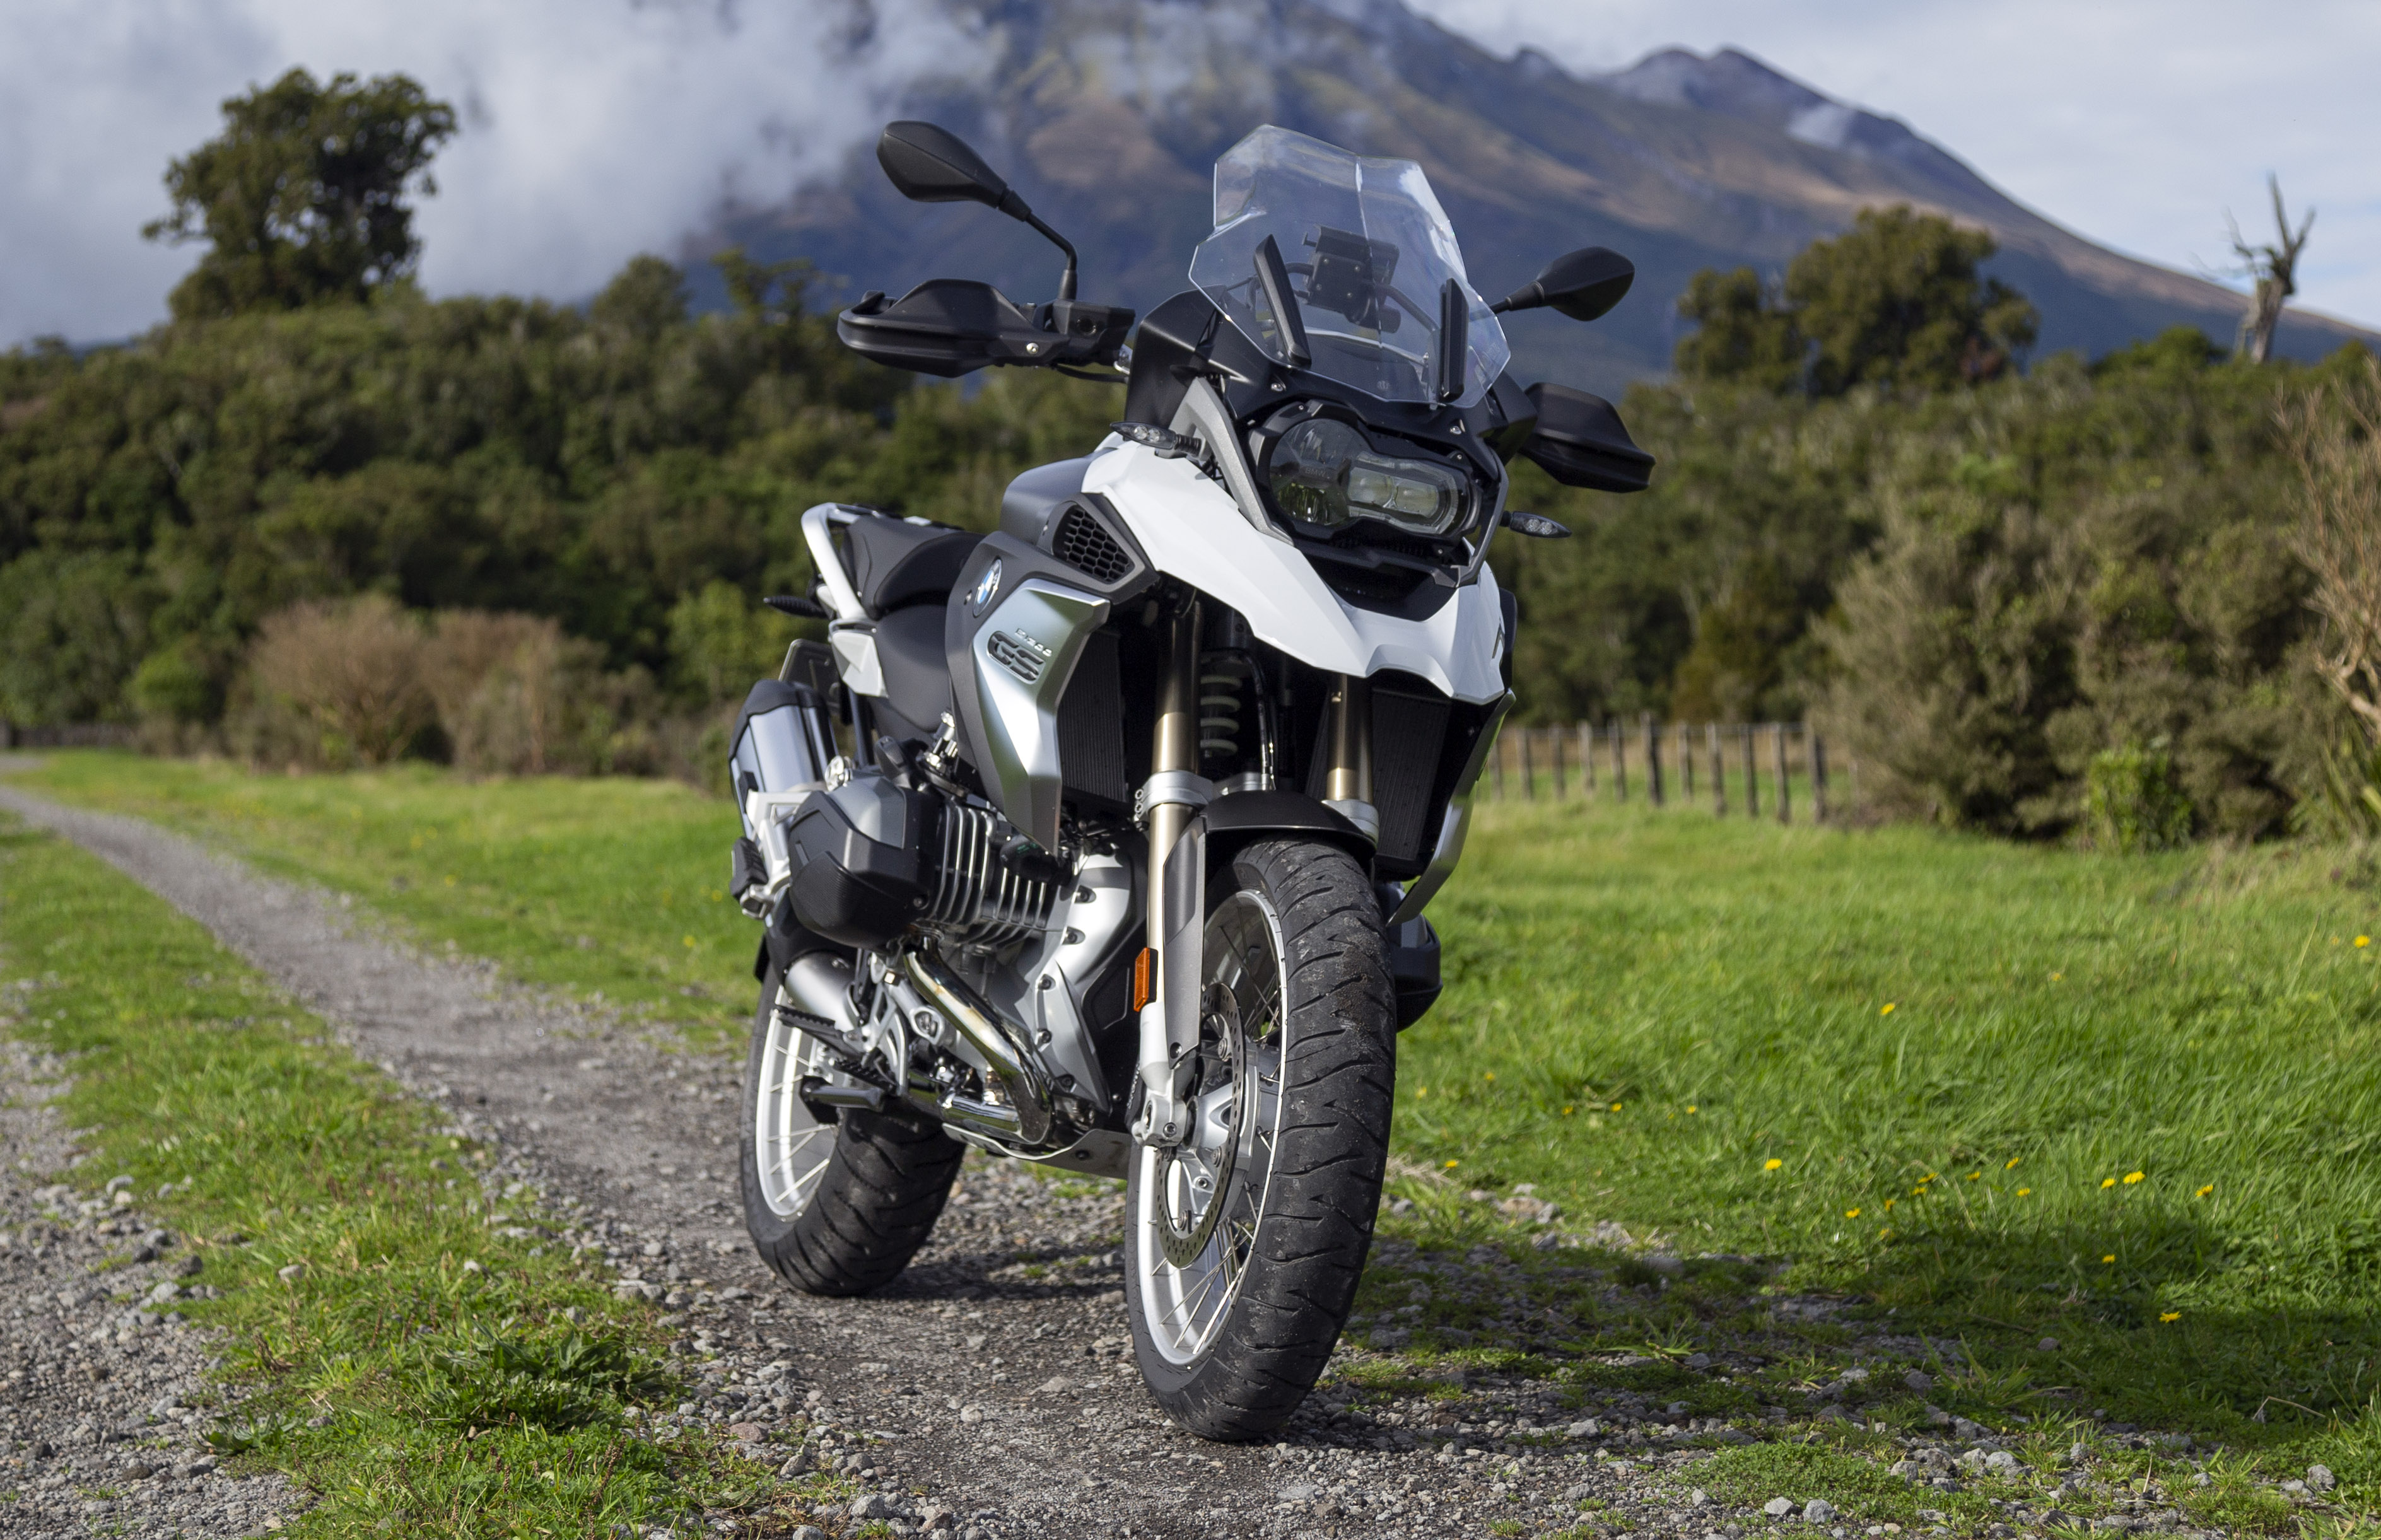 bmw r 1200 gs, motorcycle, bmw, motorcycles, front view, bike